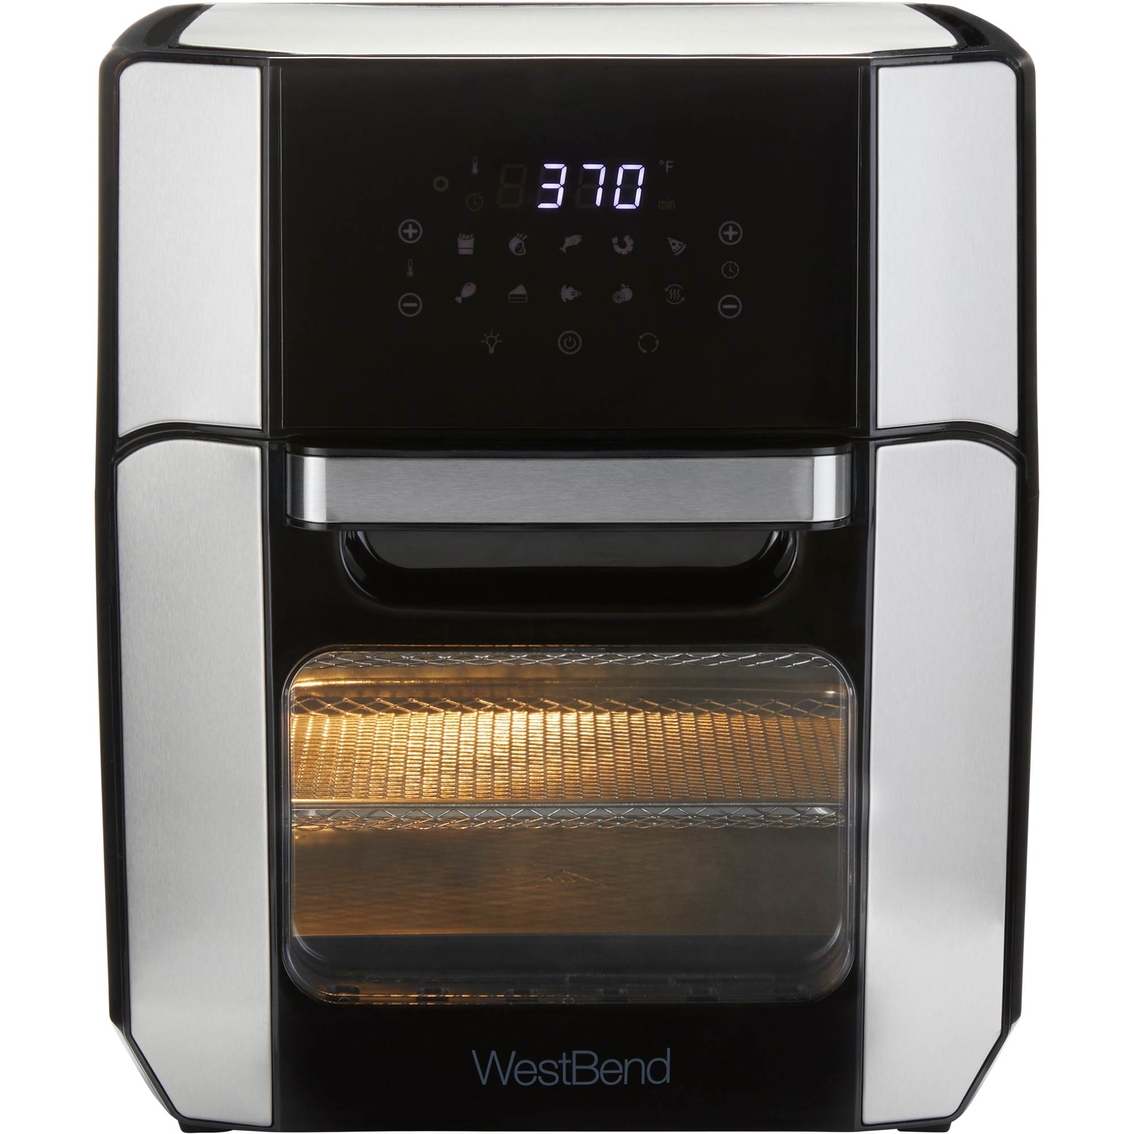 WestBend 12 qt. Air Fryer Oven - Image 2 of 10